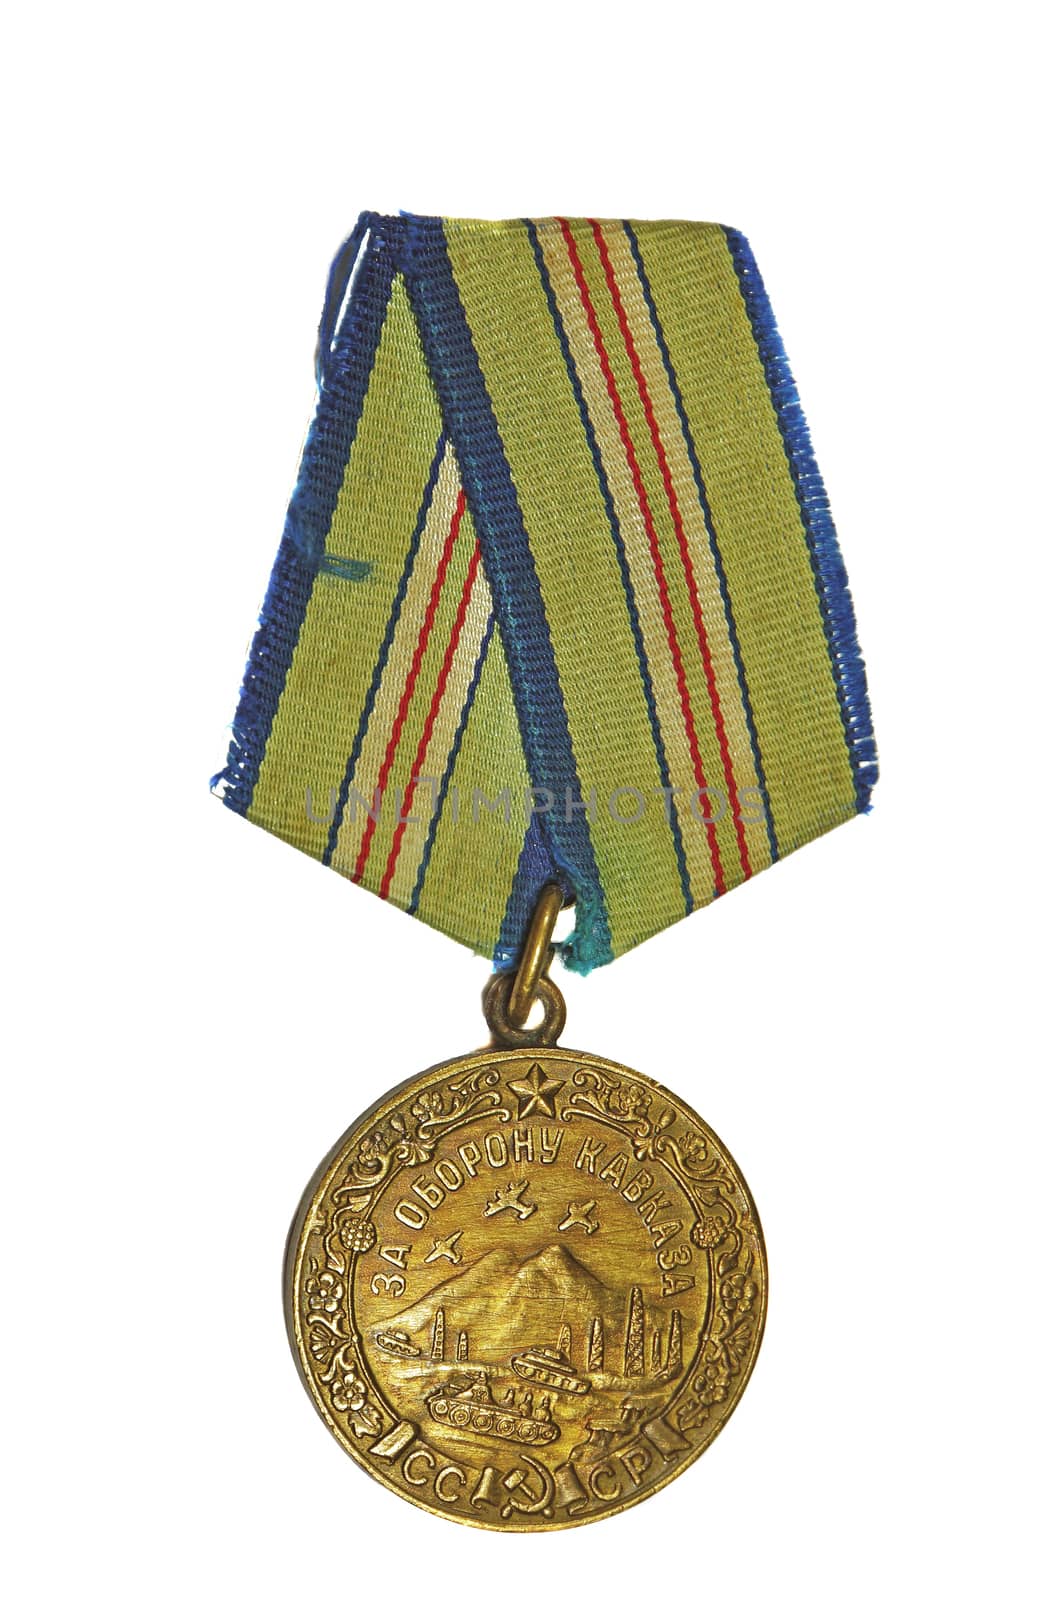 Medal "For the Defence of the Caucasus" on a white background